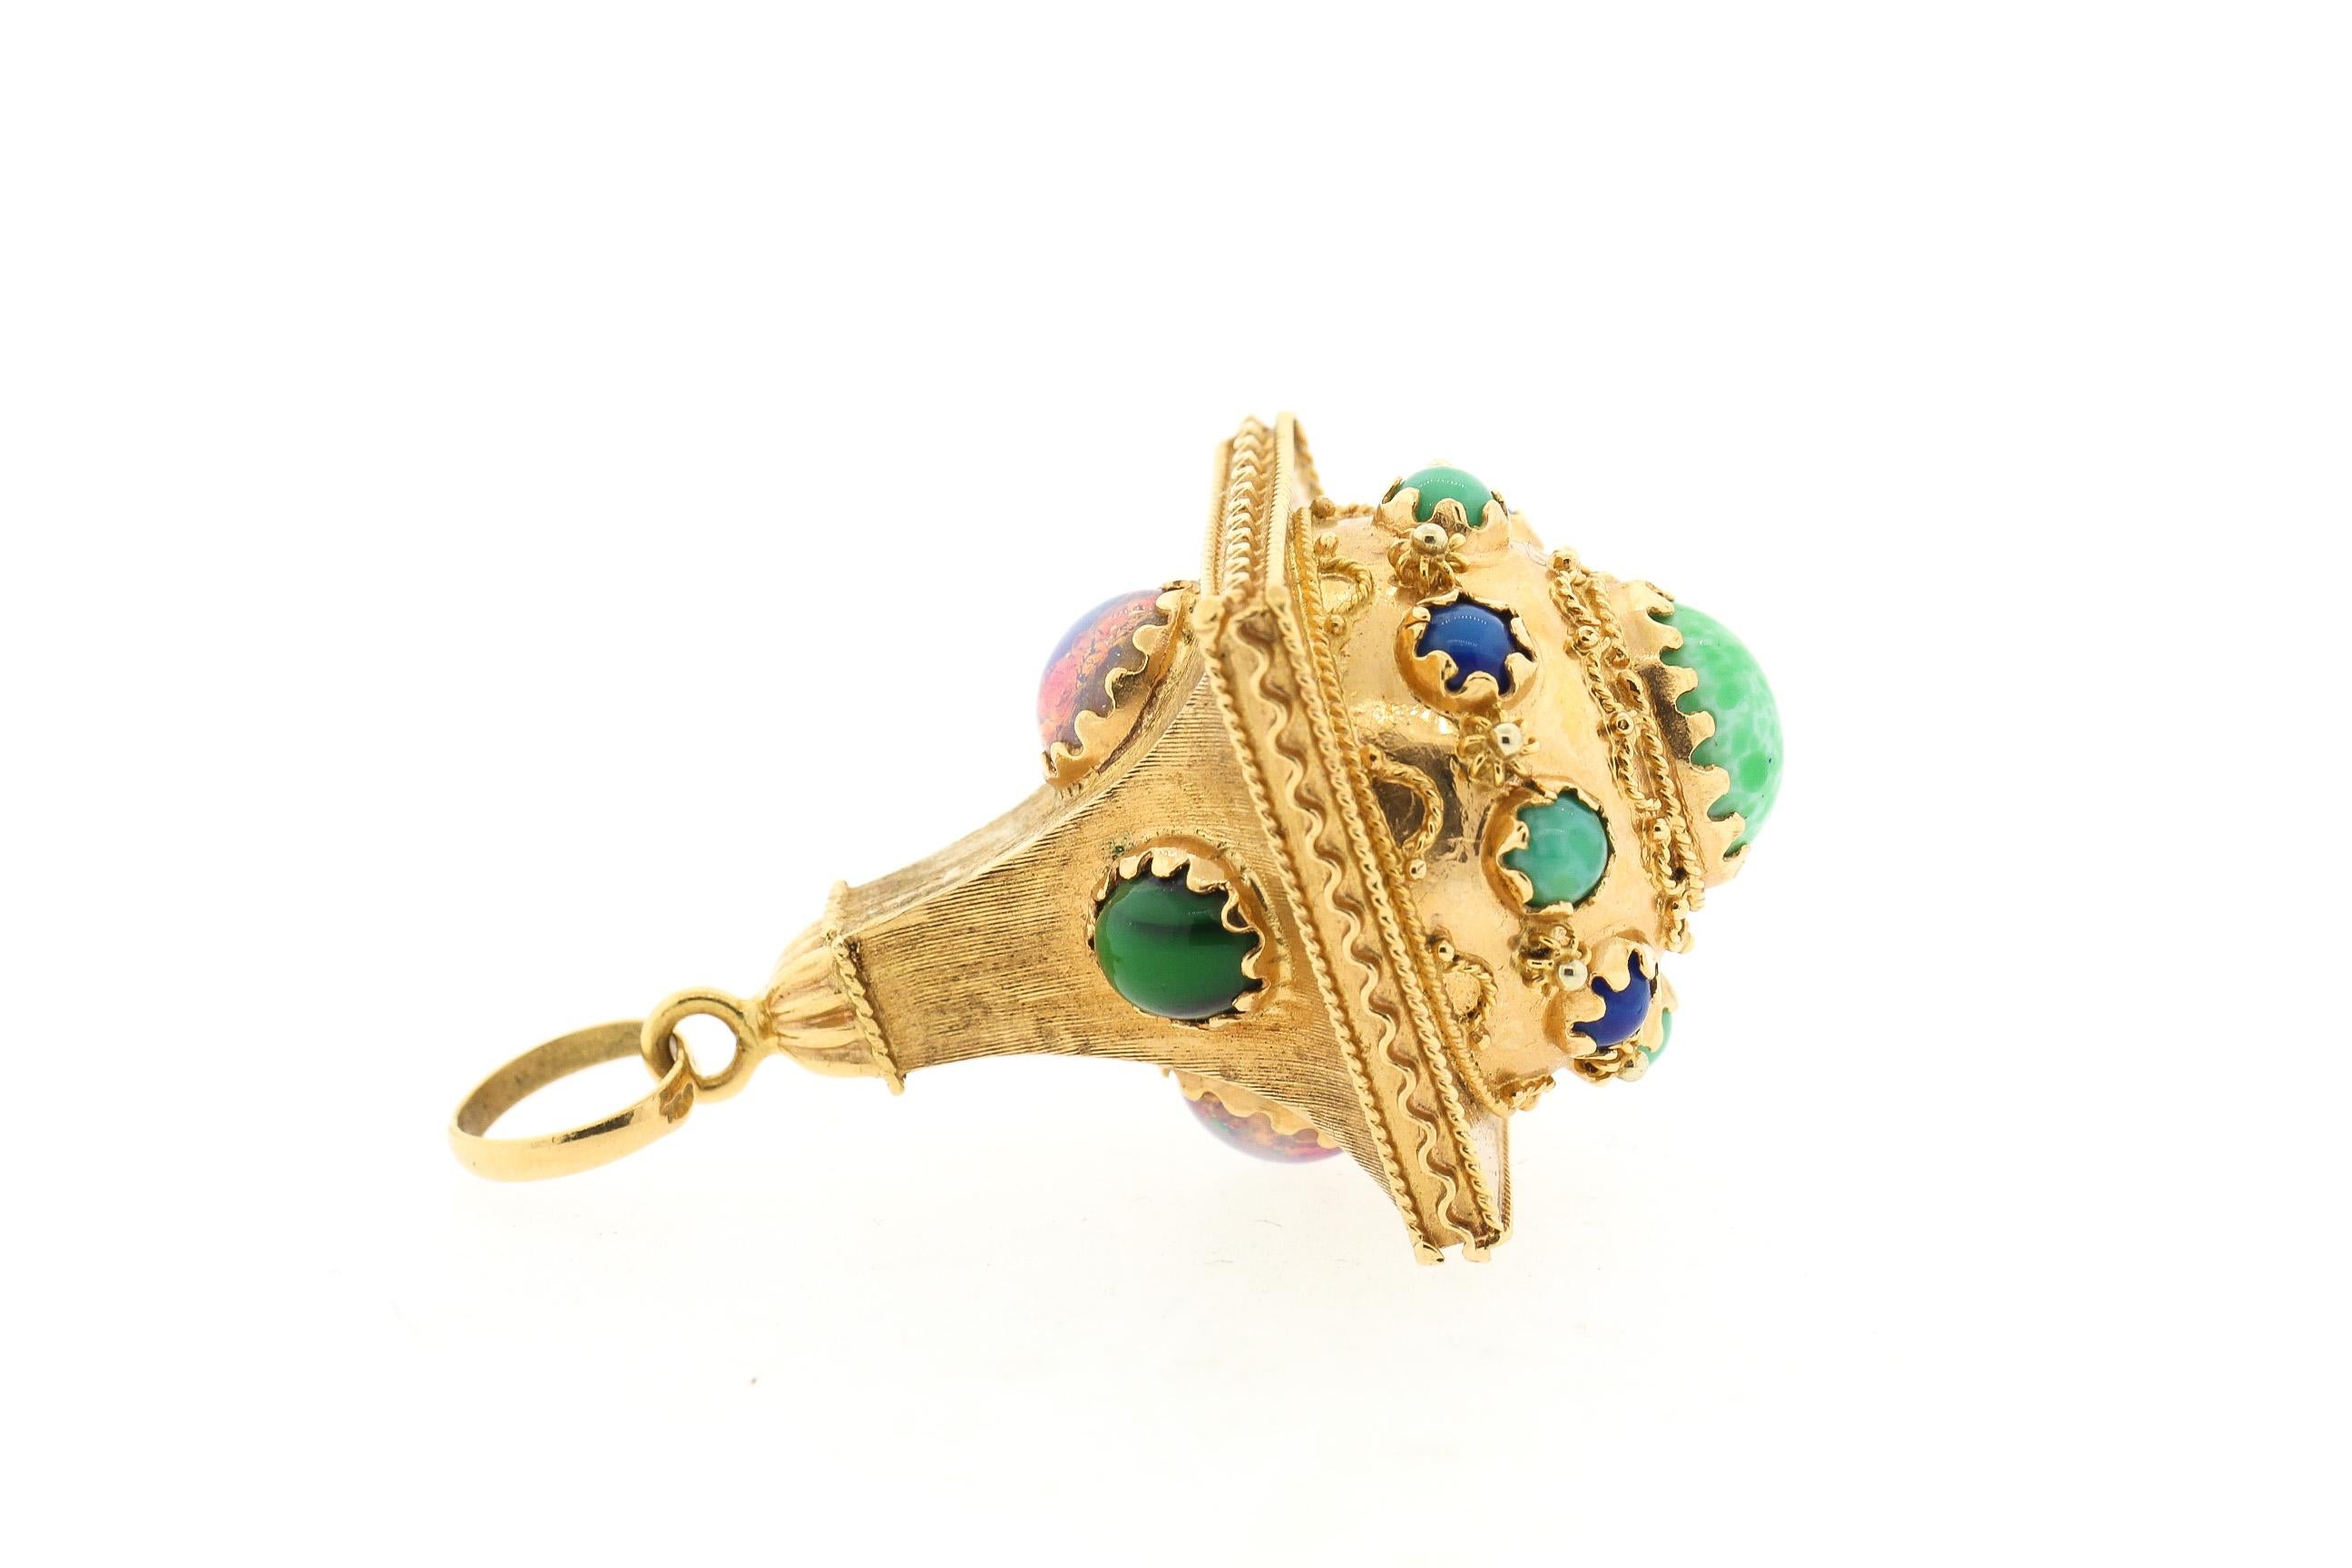 A large Etruscan Revival 18k gold pendant set with cabochon opal, lapis, malachite and turquoise, circa 1960. The pendant is in the shape of a lantern with twisted wire work detail. It comes with a large bail ready to hang from that perfect chain,